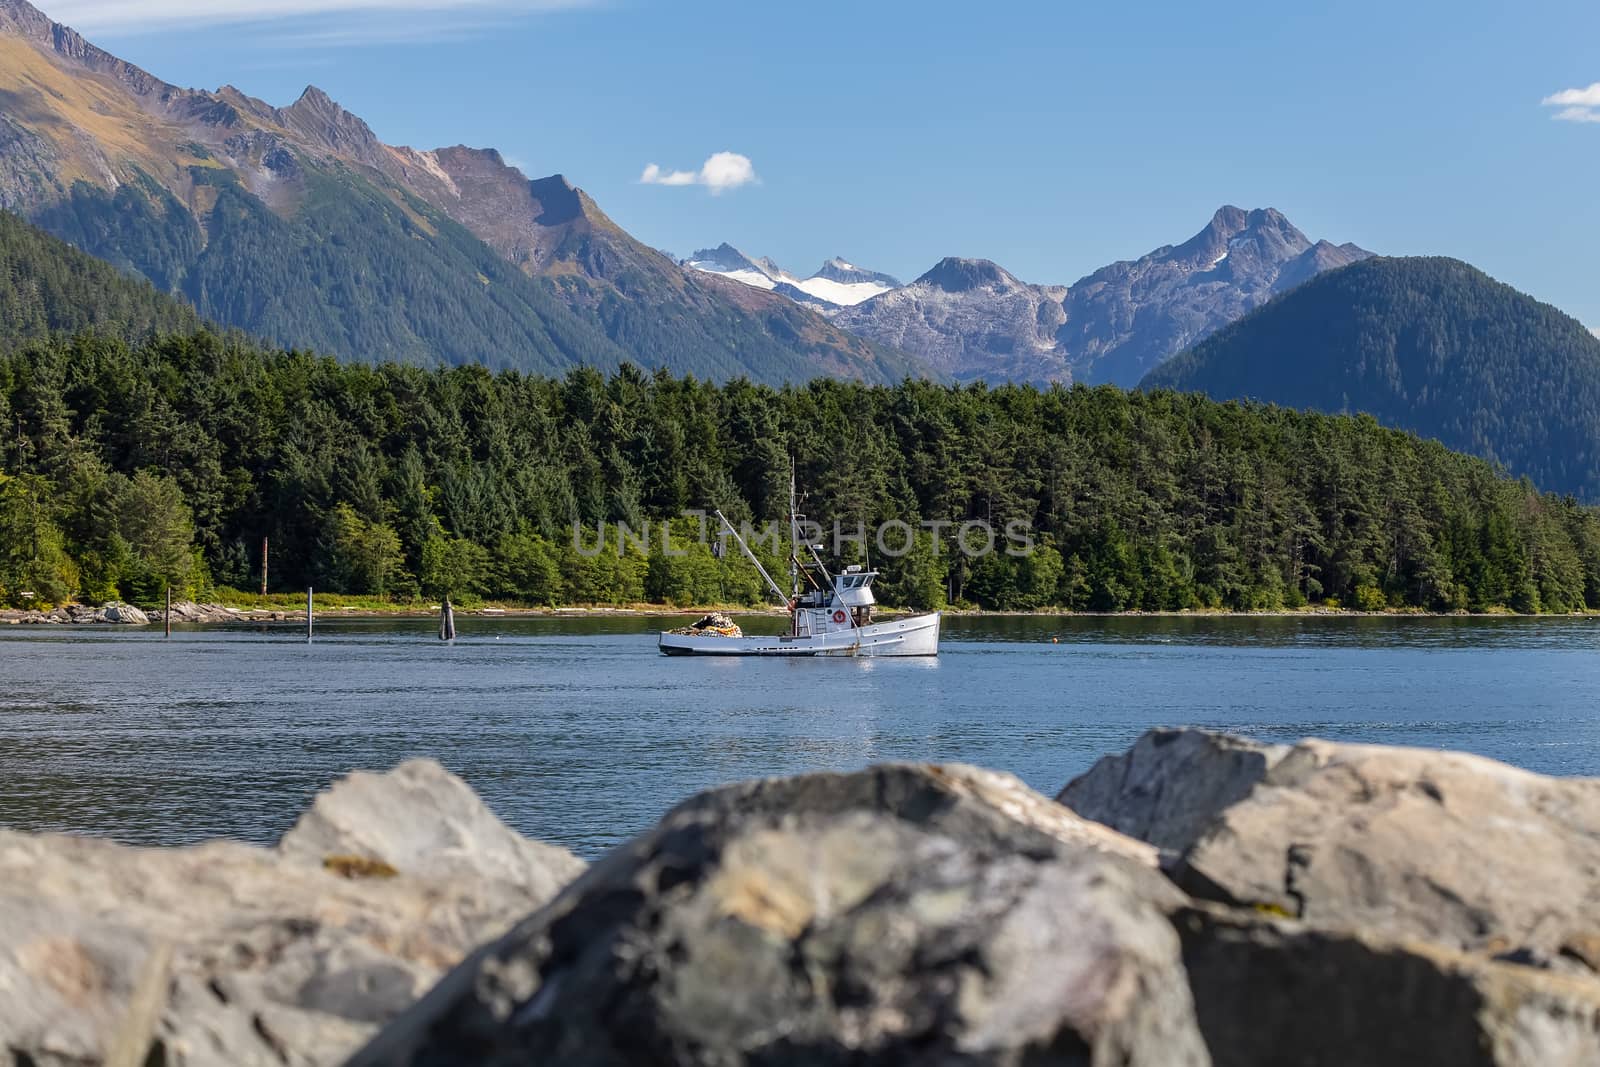 Fishing boat drifting in harbor. Rocks in soft focus in the foreground. Mountains and forest in the background. Sitka, Alaska, USA